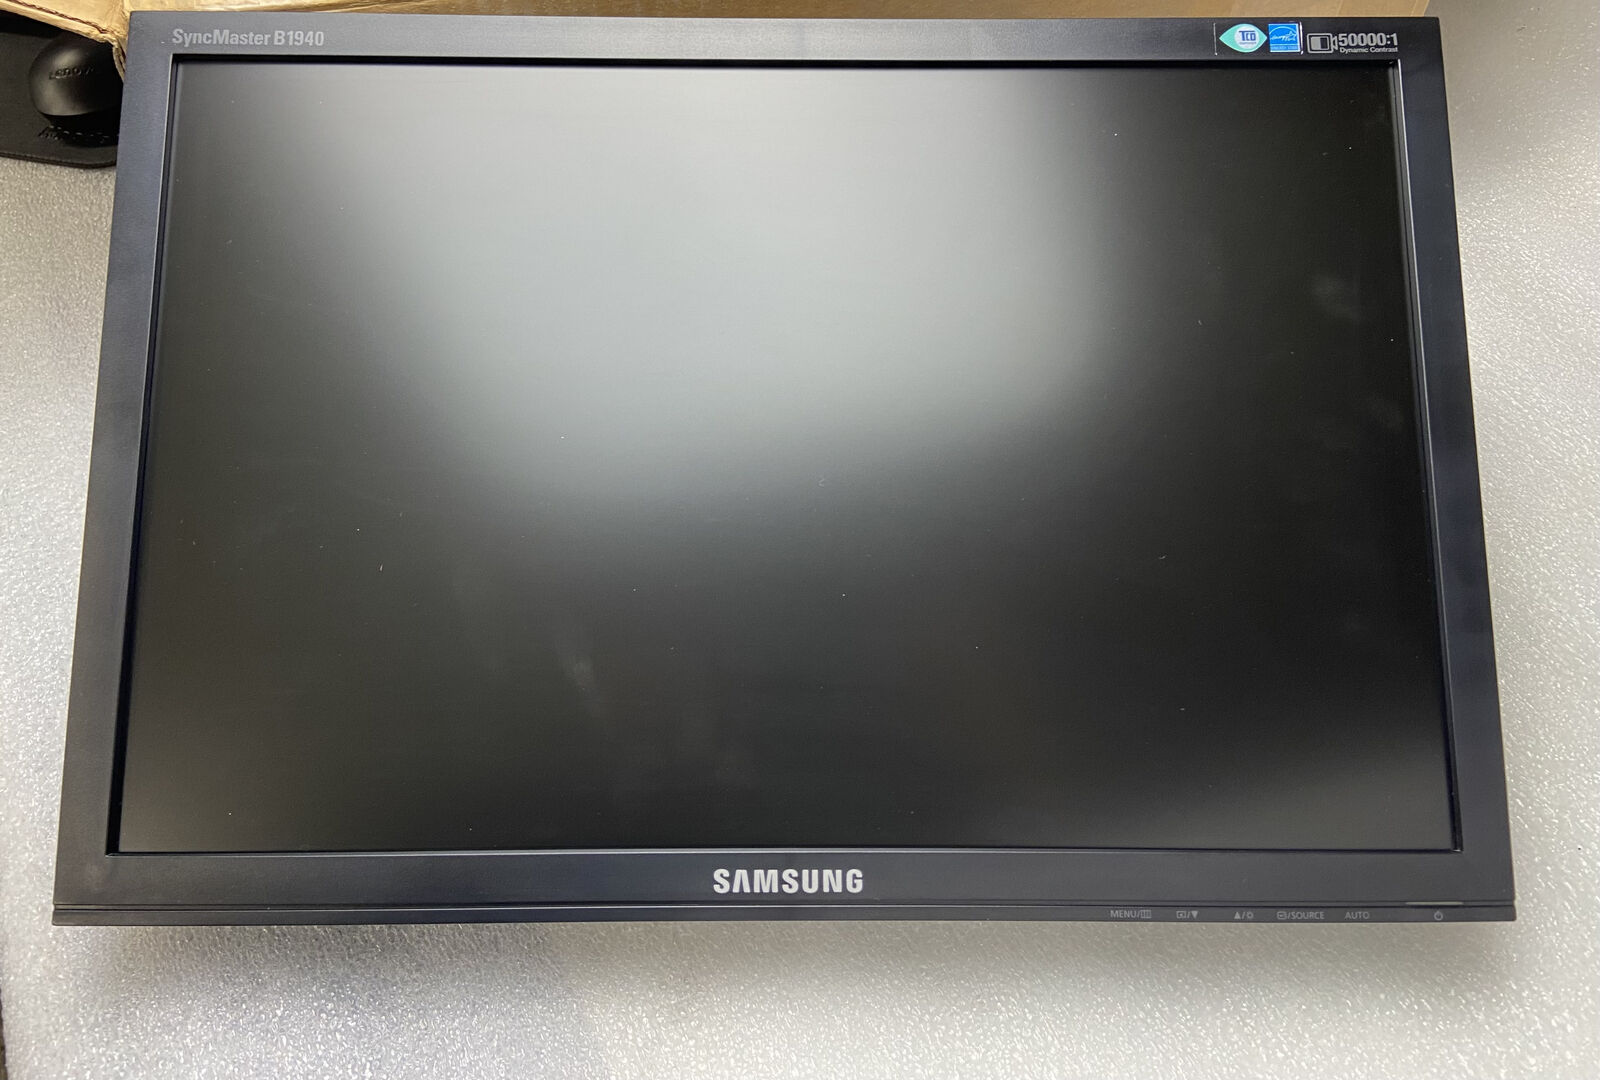 Samsung S19B420BW 420 Series SyncMaster 19-Inch LED LCD Monitor GRADE A TESTED